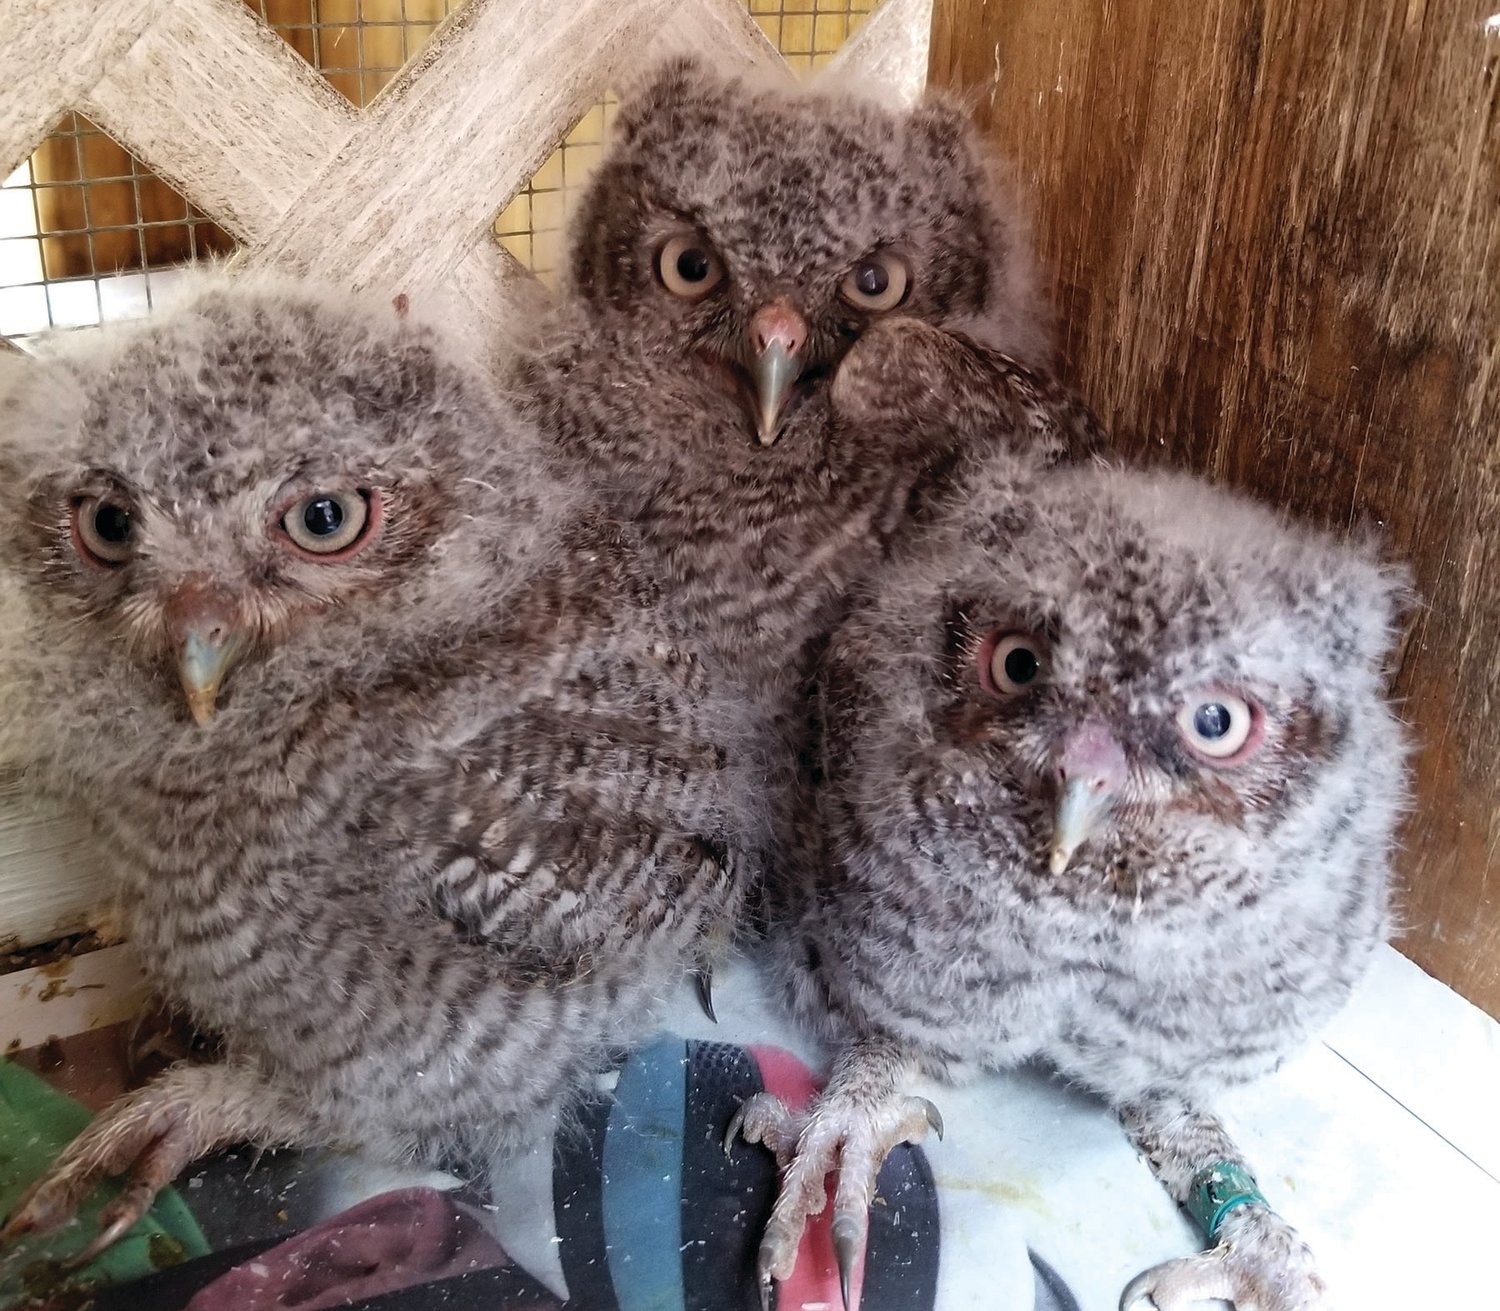 This is a photo of eastern screech owl babies.